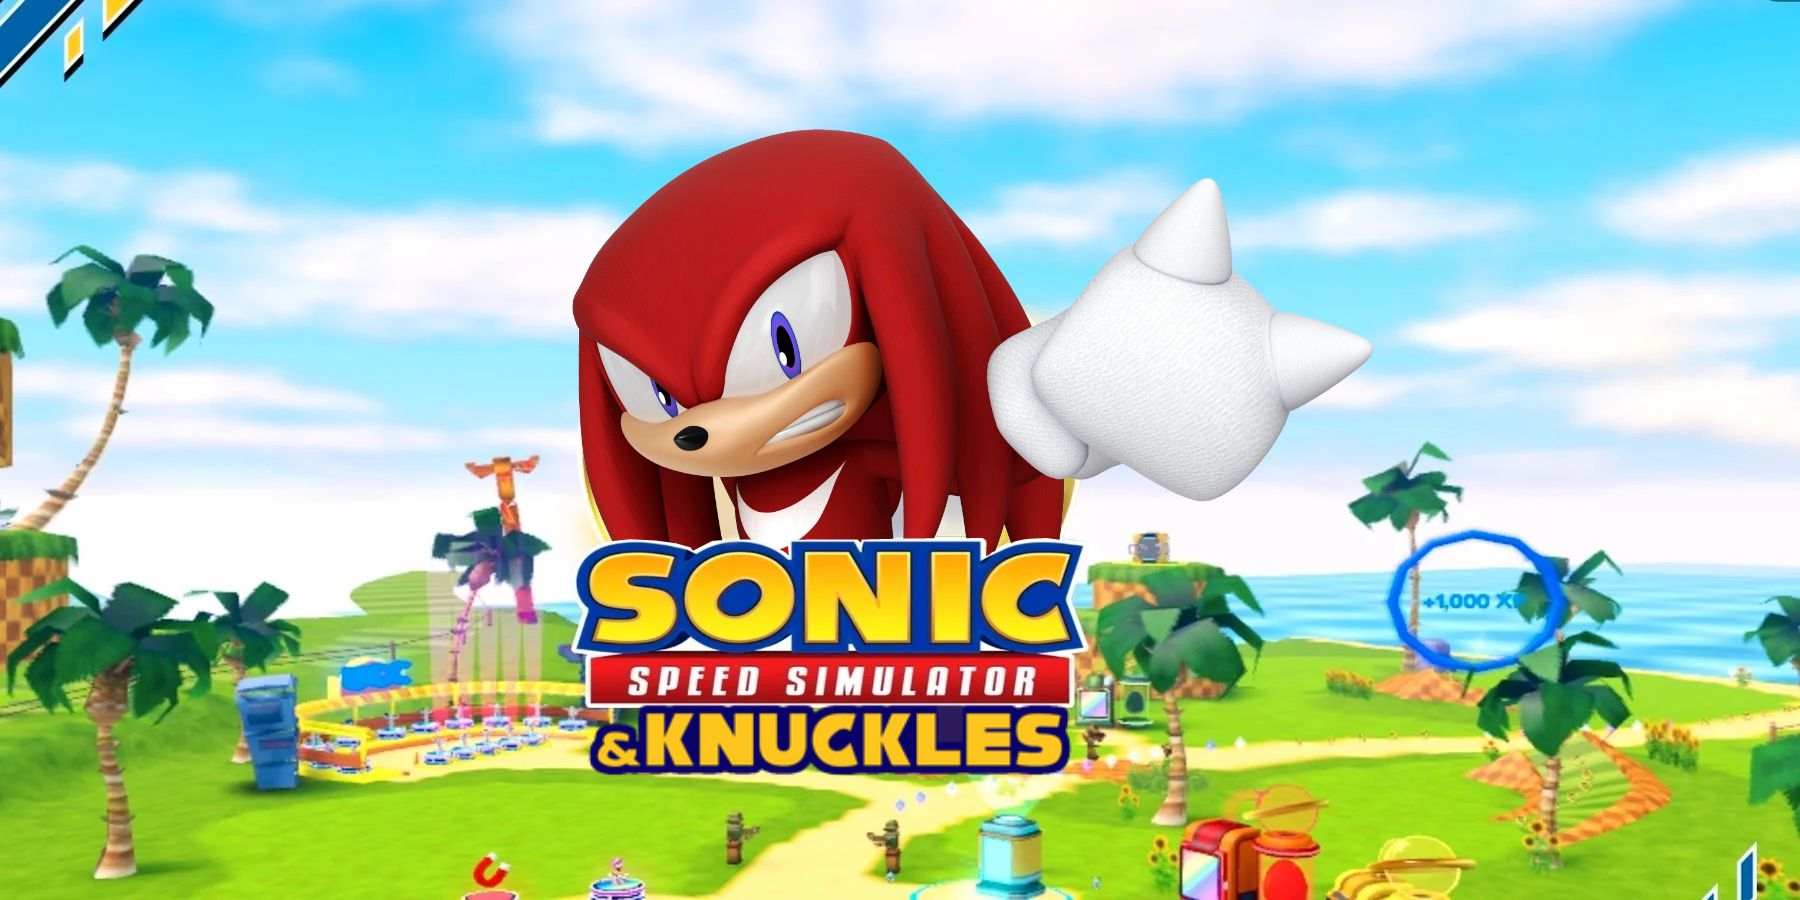 New* Sonic Speed Simulator All New Codes!